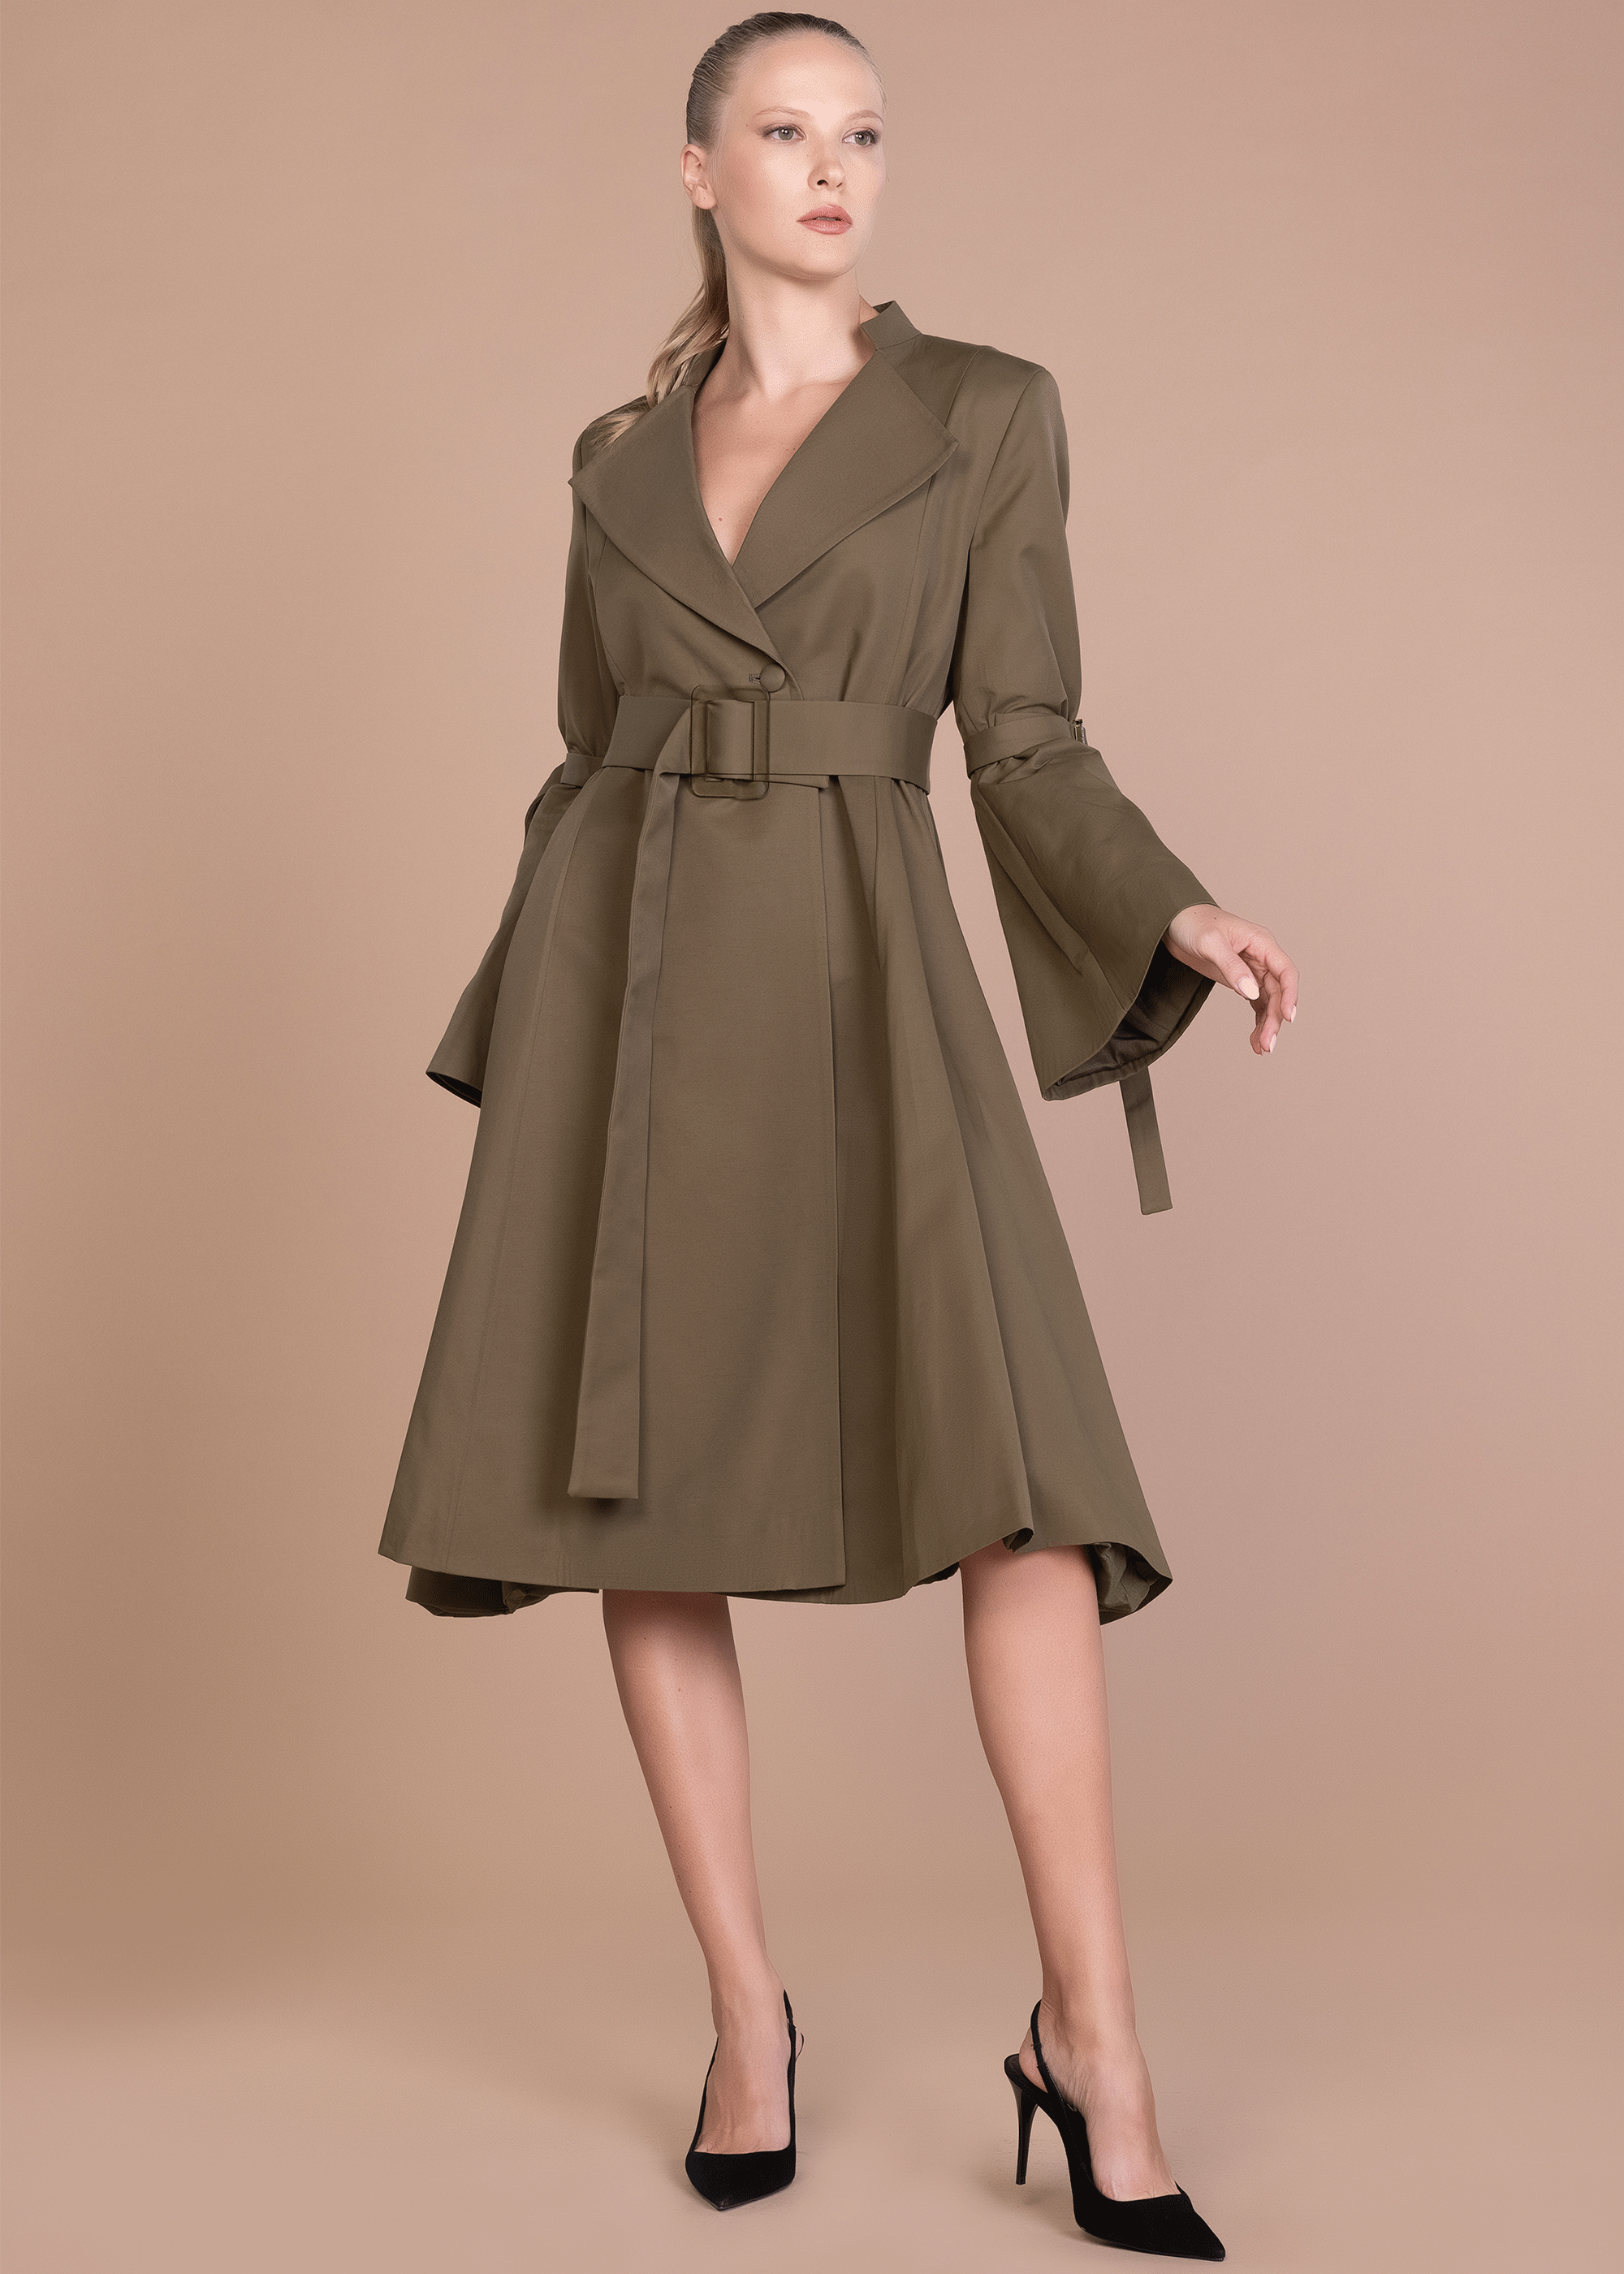 Coats and Jackets for women at Liliblanc online, Olive Green M